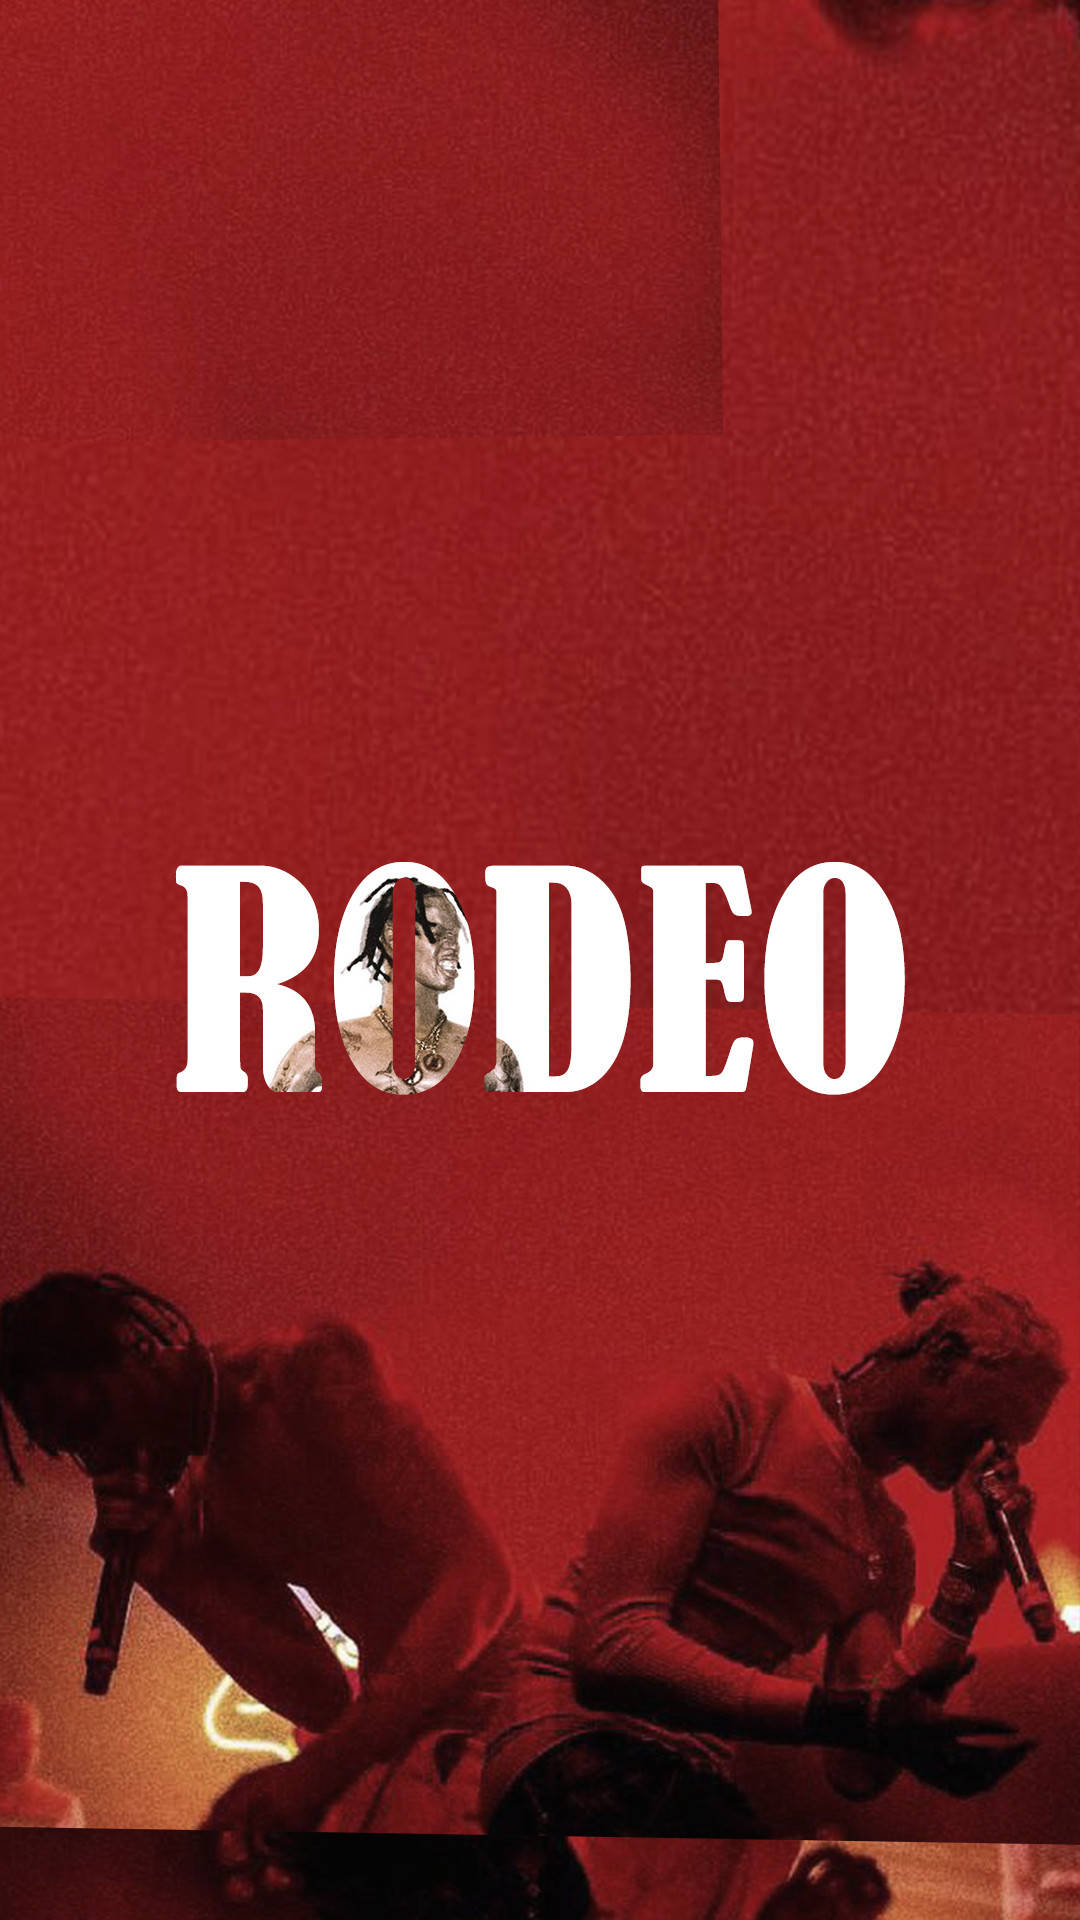 Rodeo - A Cover Of A Song Background